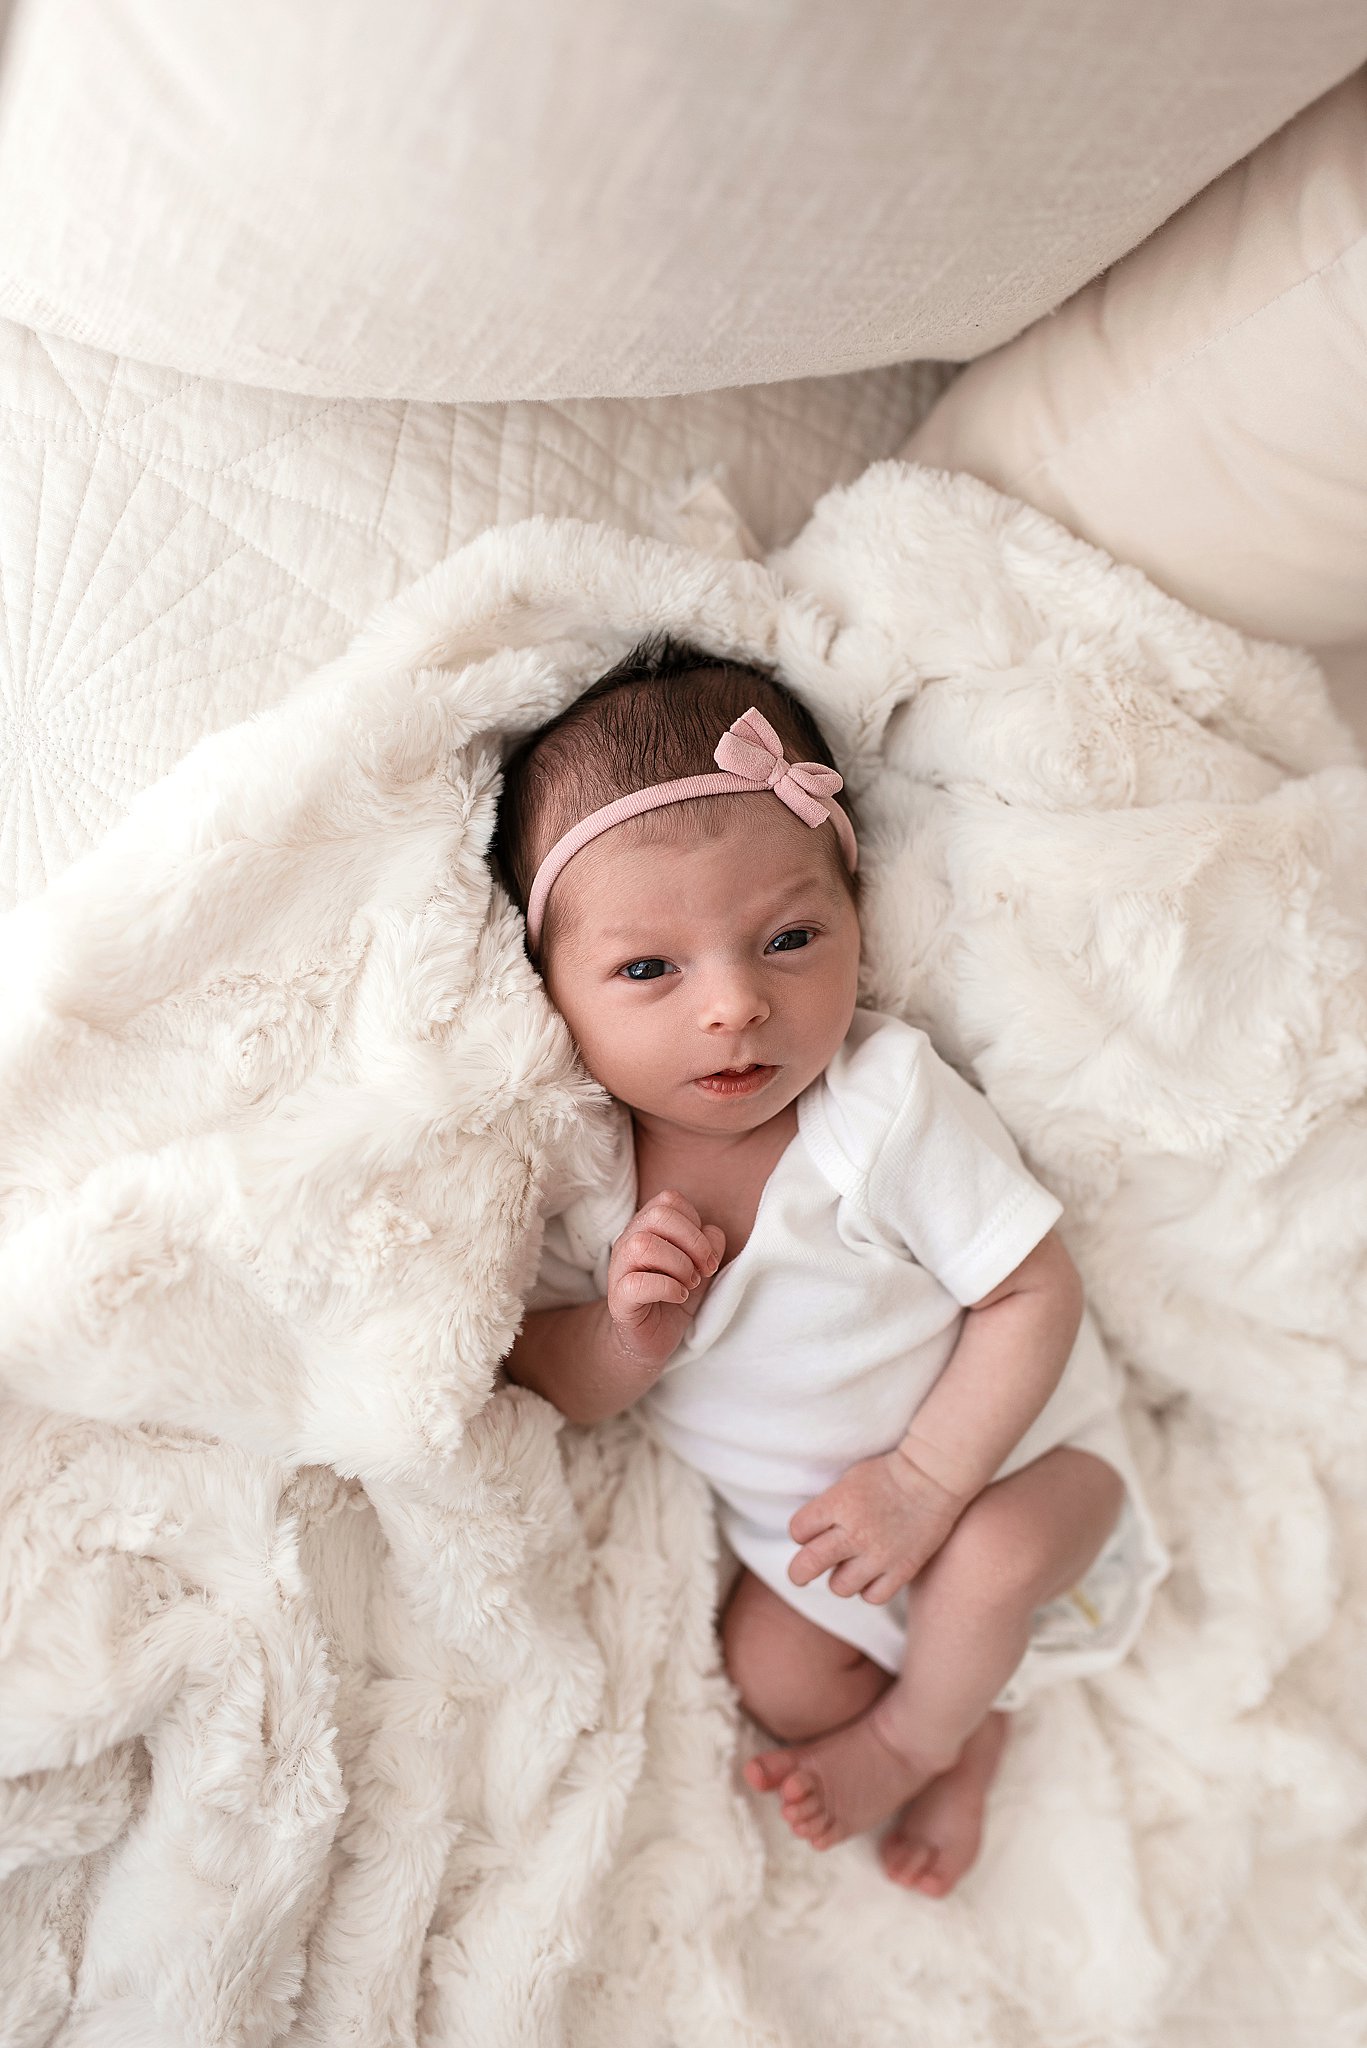 A newborn baby lays on a white furry blanket on a couch with eyes open and a pink bow headband